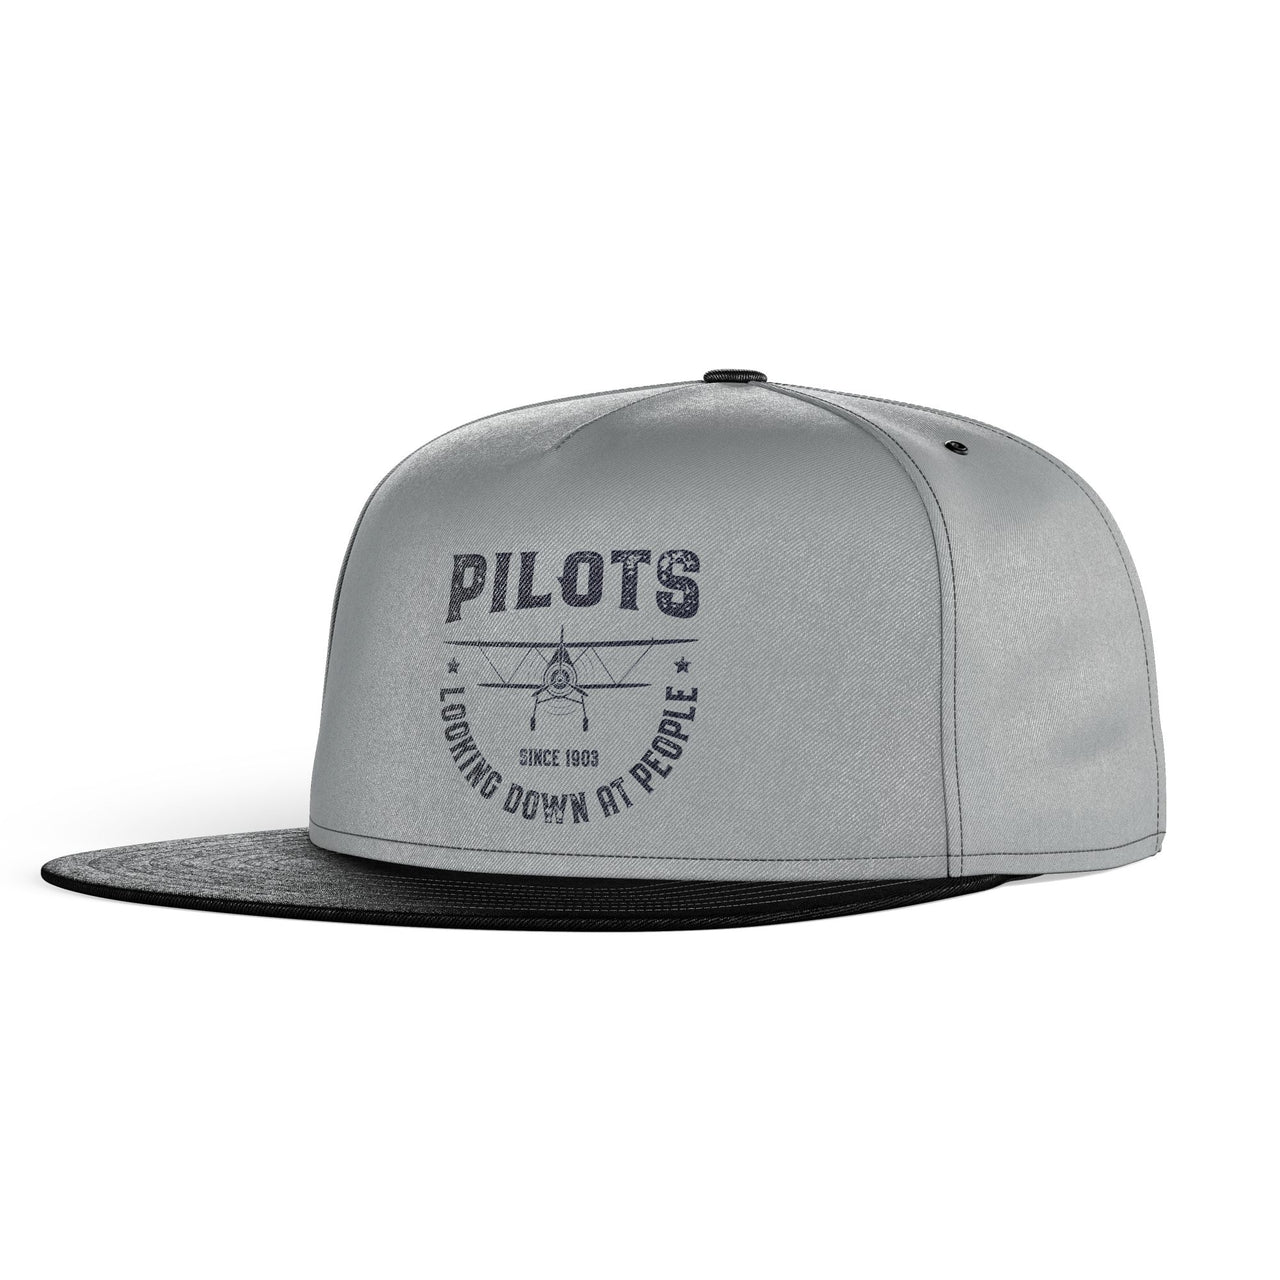 Pilots Looking Down at People Since 1903 Designed Snapback Caps & Hats